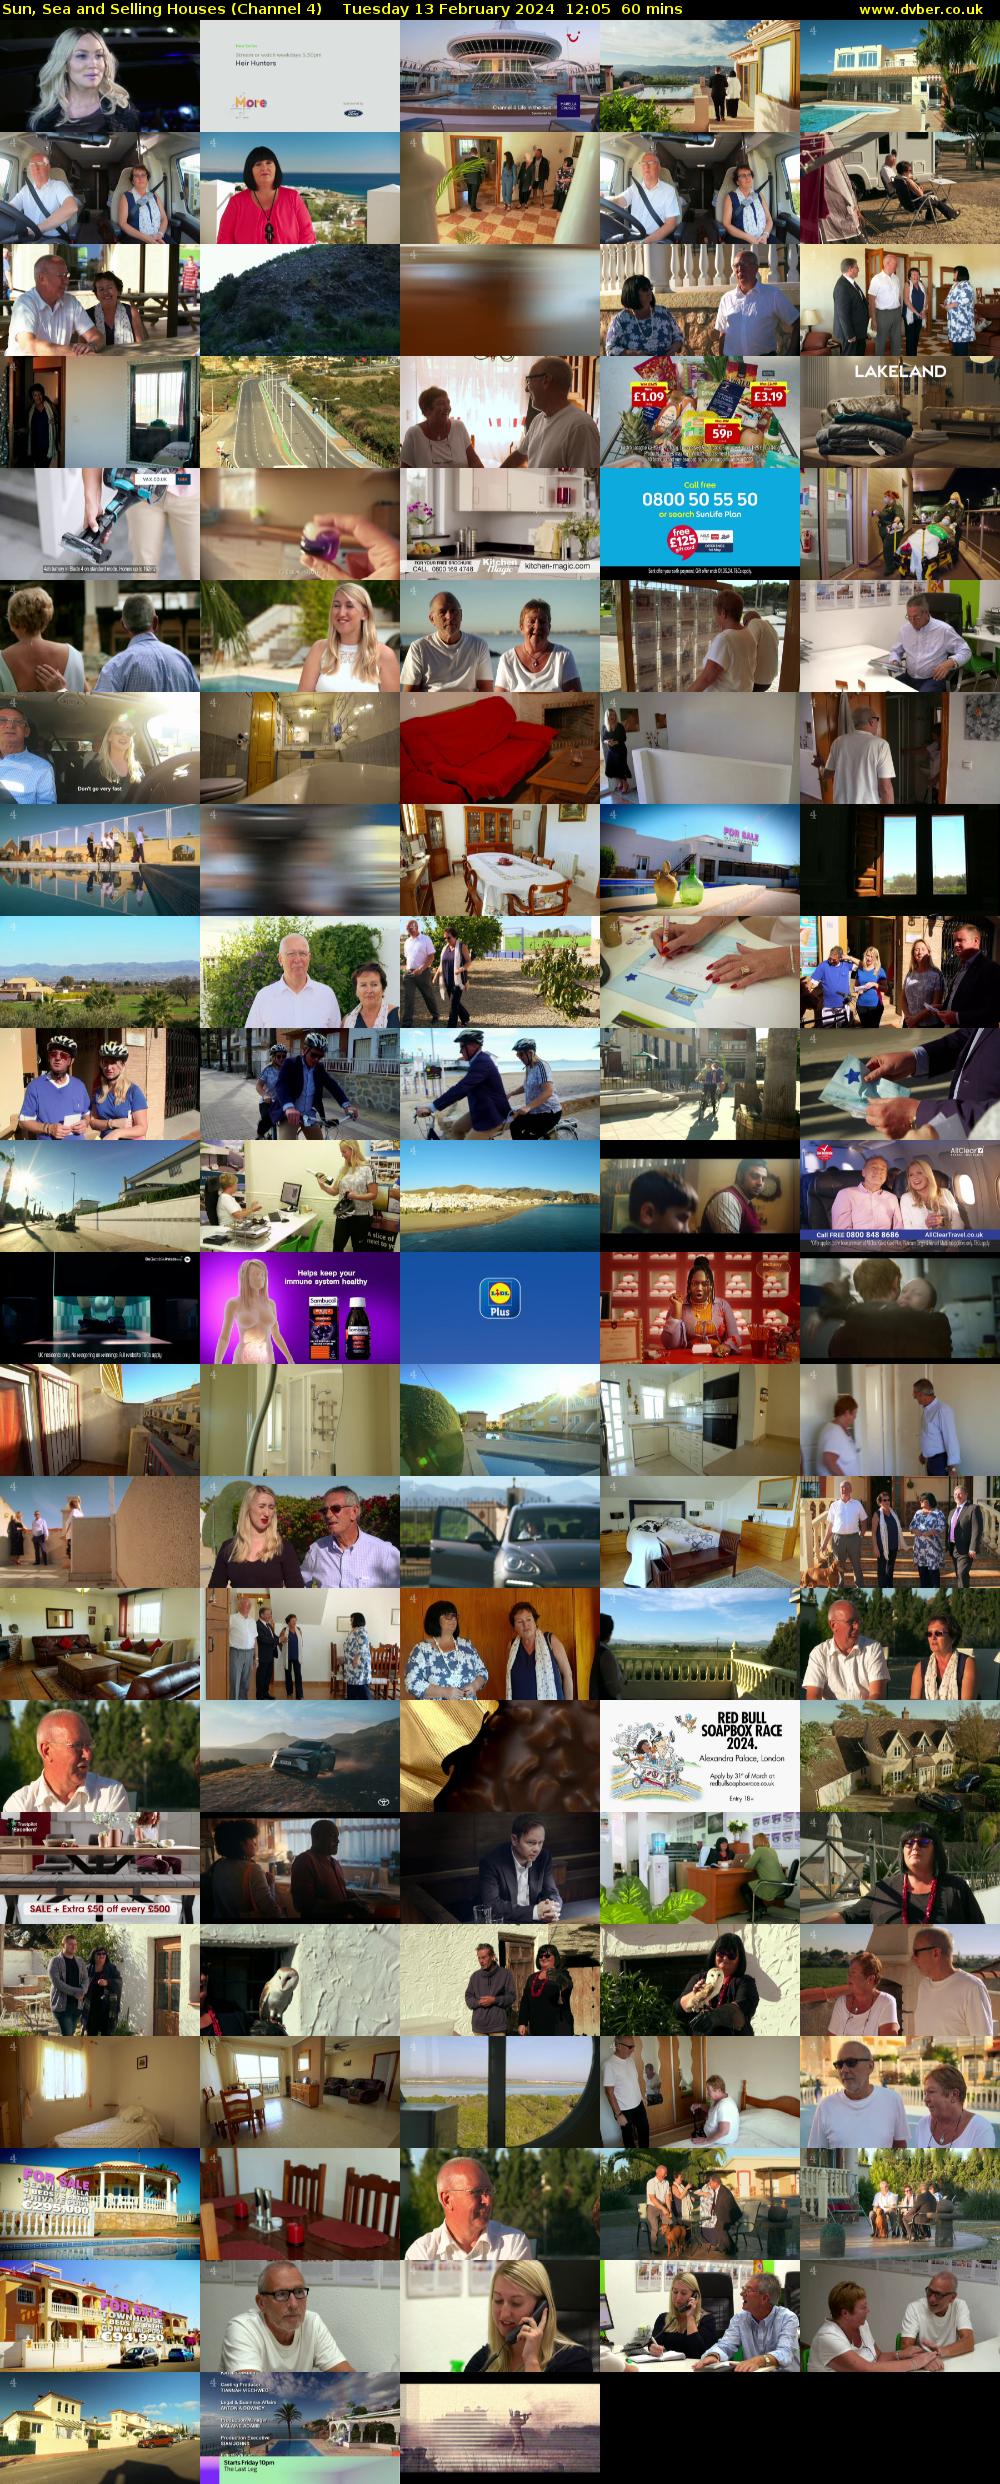 Sun, Sea and Selling Houses (Channel 4) Tuesday 13 February 2024 12:05 - 13:05